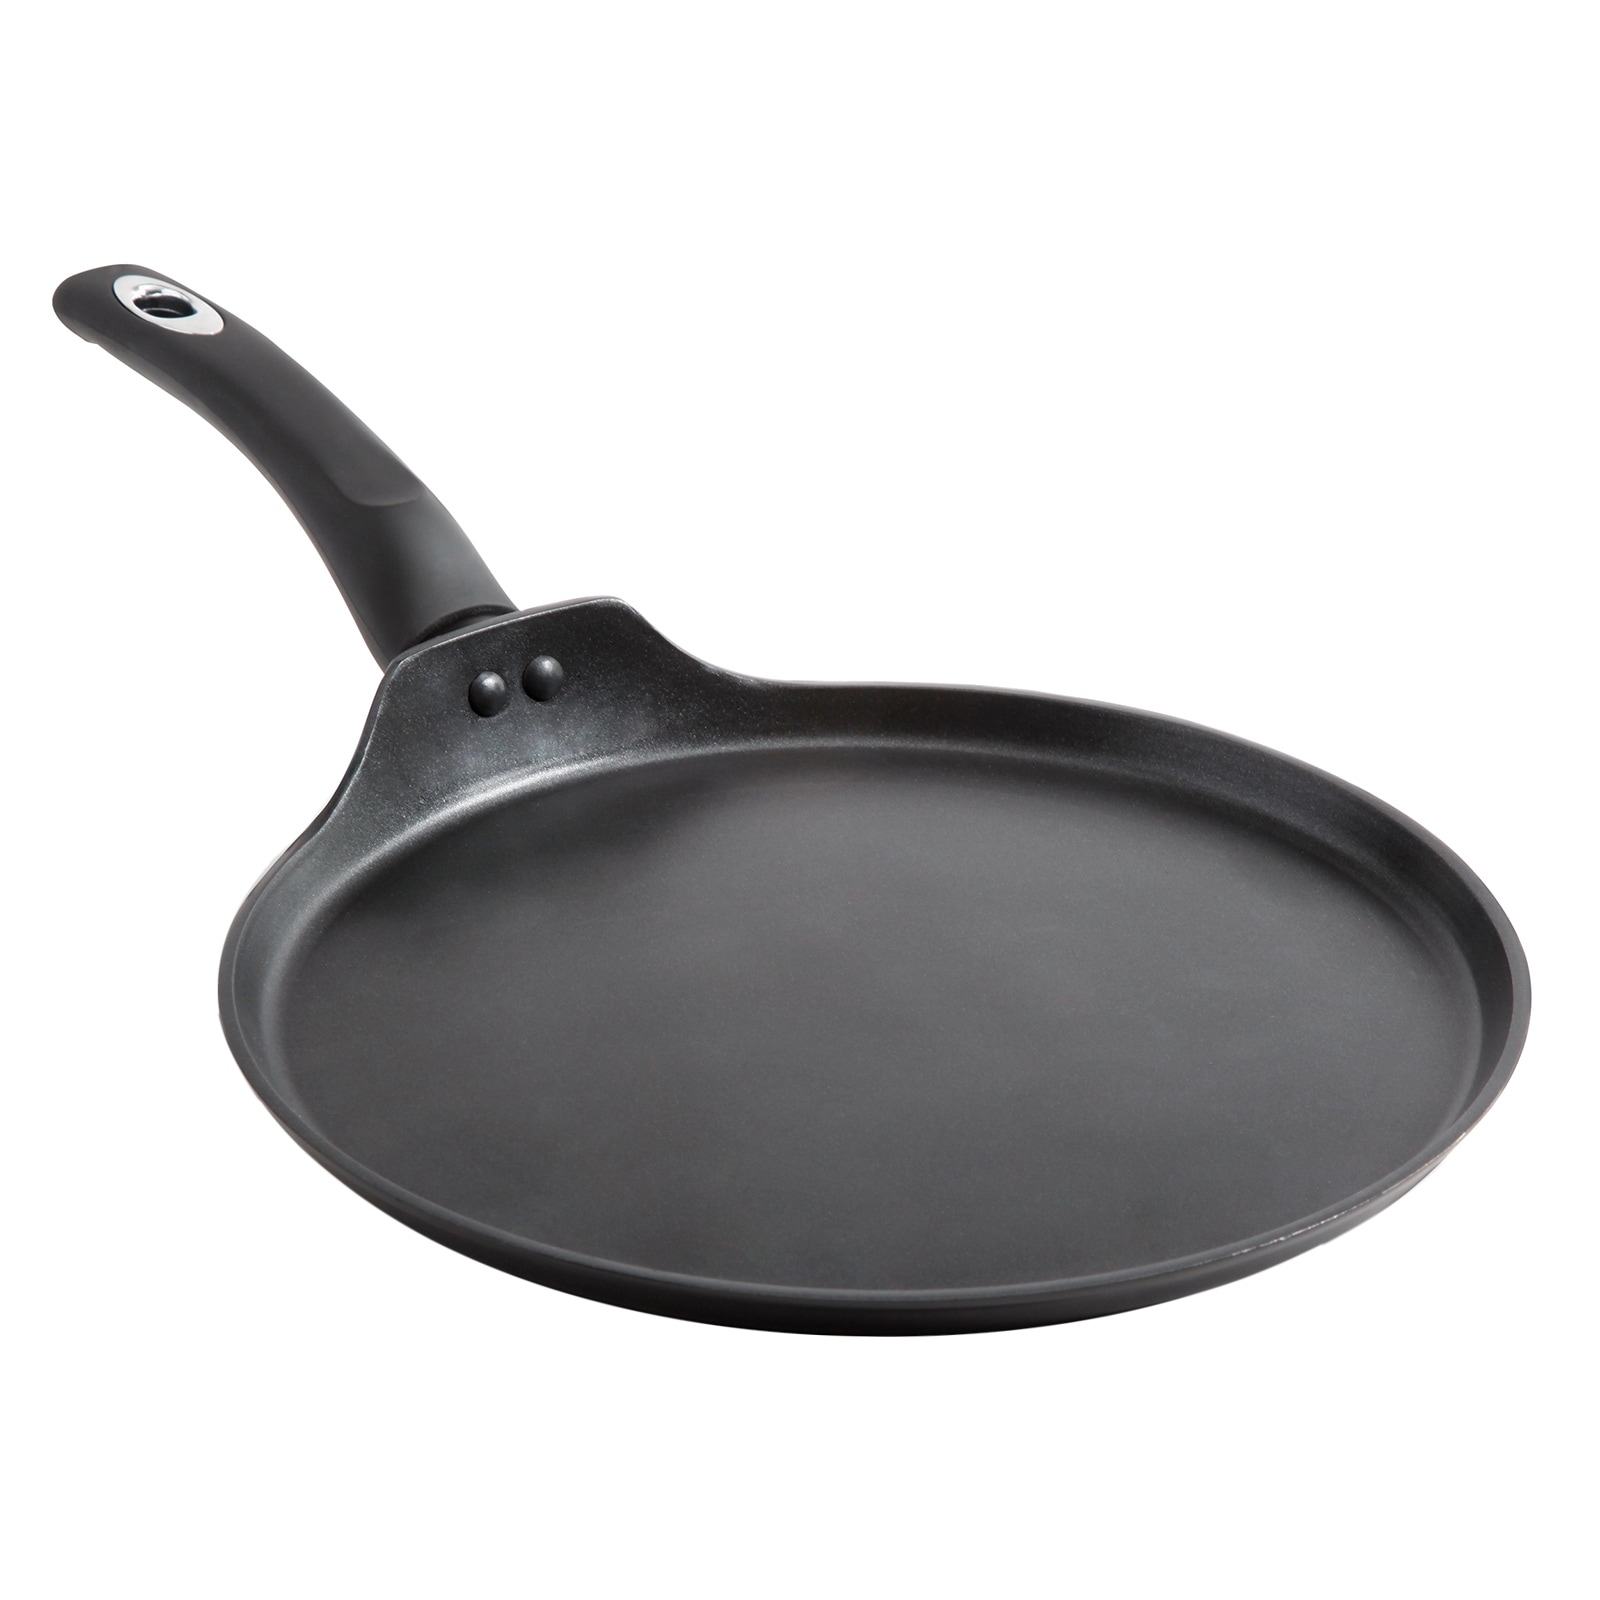 Oster Rigby 12 Inch Green Aluminum Nonstick Frying Pan with